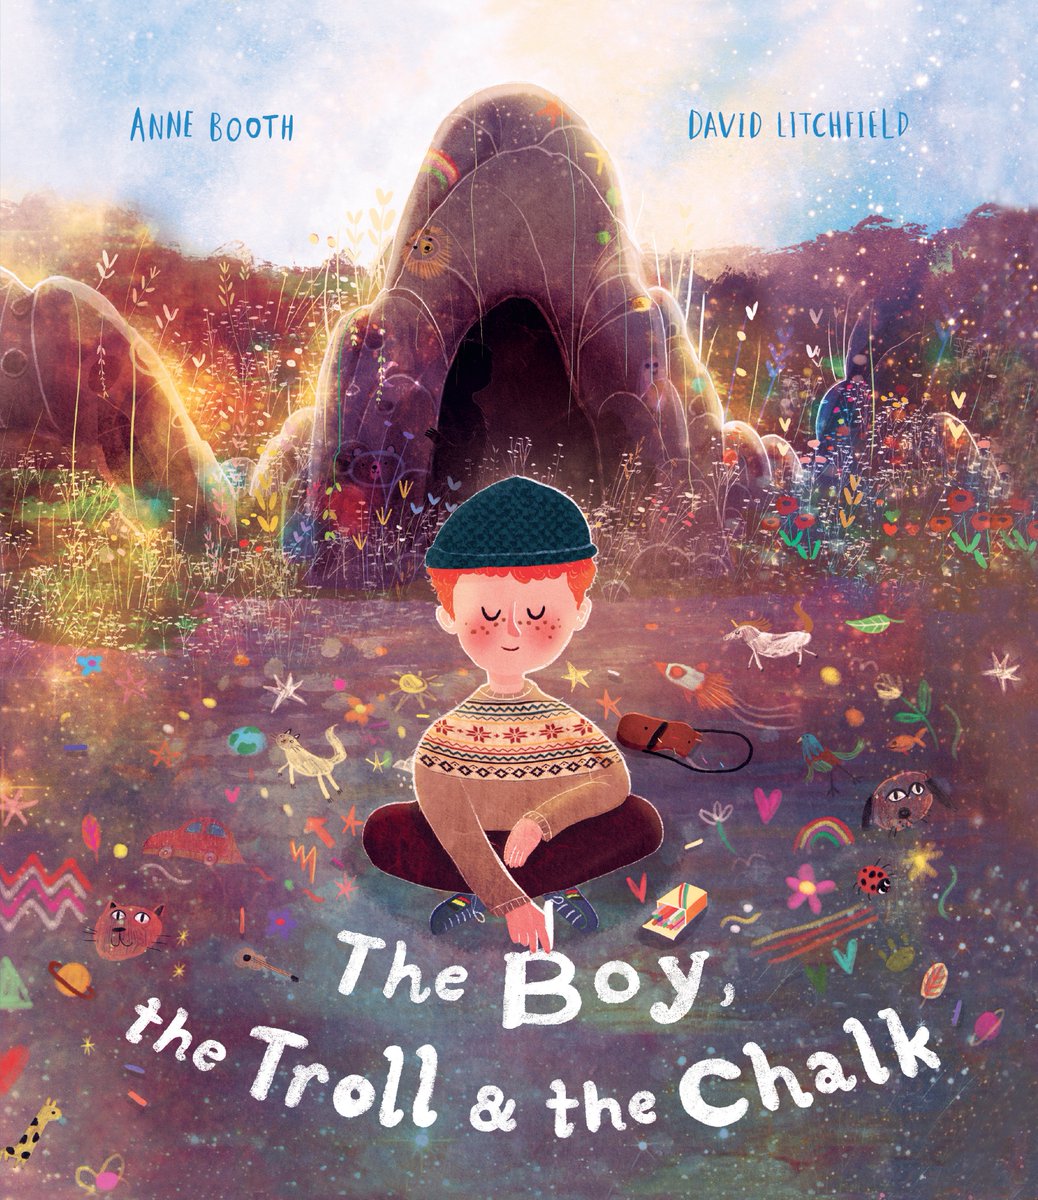 NEW BOOK! 🥳 So happy to share the cover for ‘The Boy, The Troll & The Chalk’ the brand new picture book written by @Bridgeanne and illustrated by me. This is myself and Anne’s second collaboration after ‘A Shelter For Sadness’ Publishing this June with @templarbooks ❤️